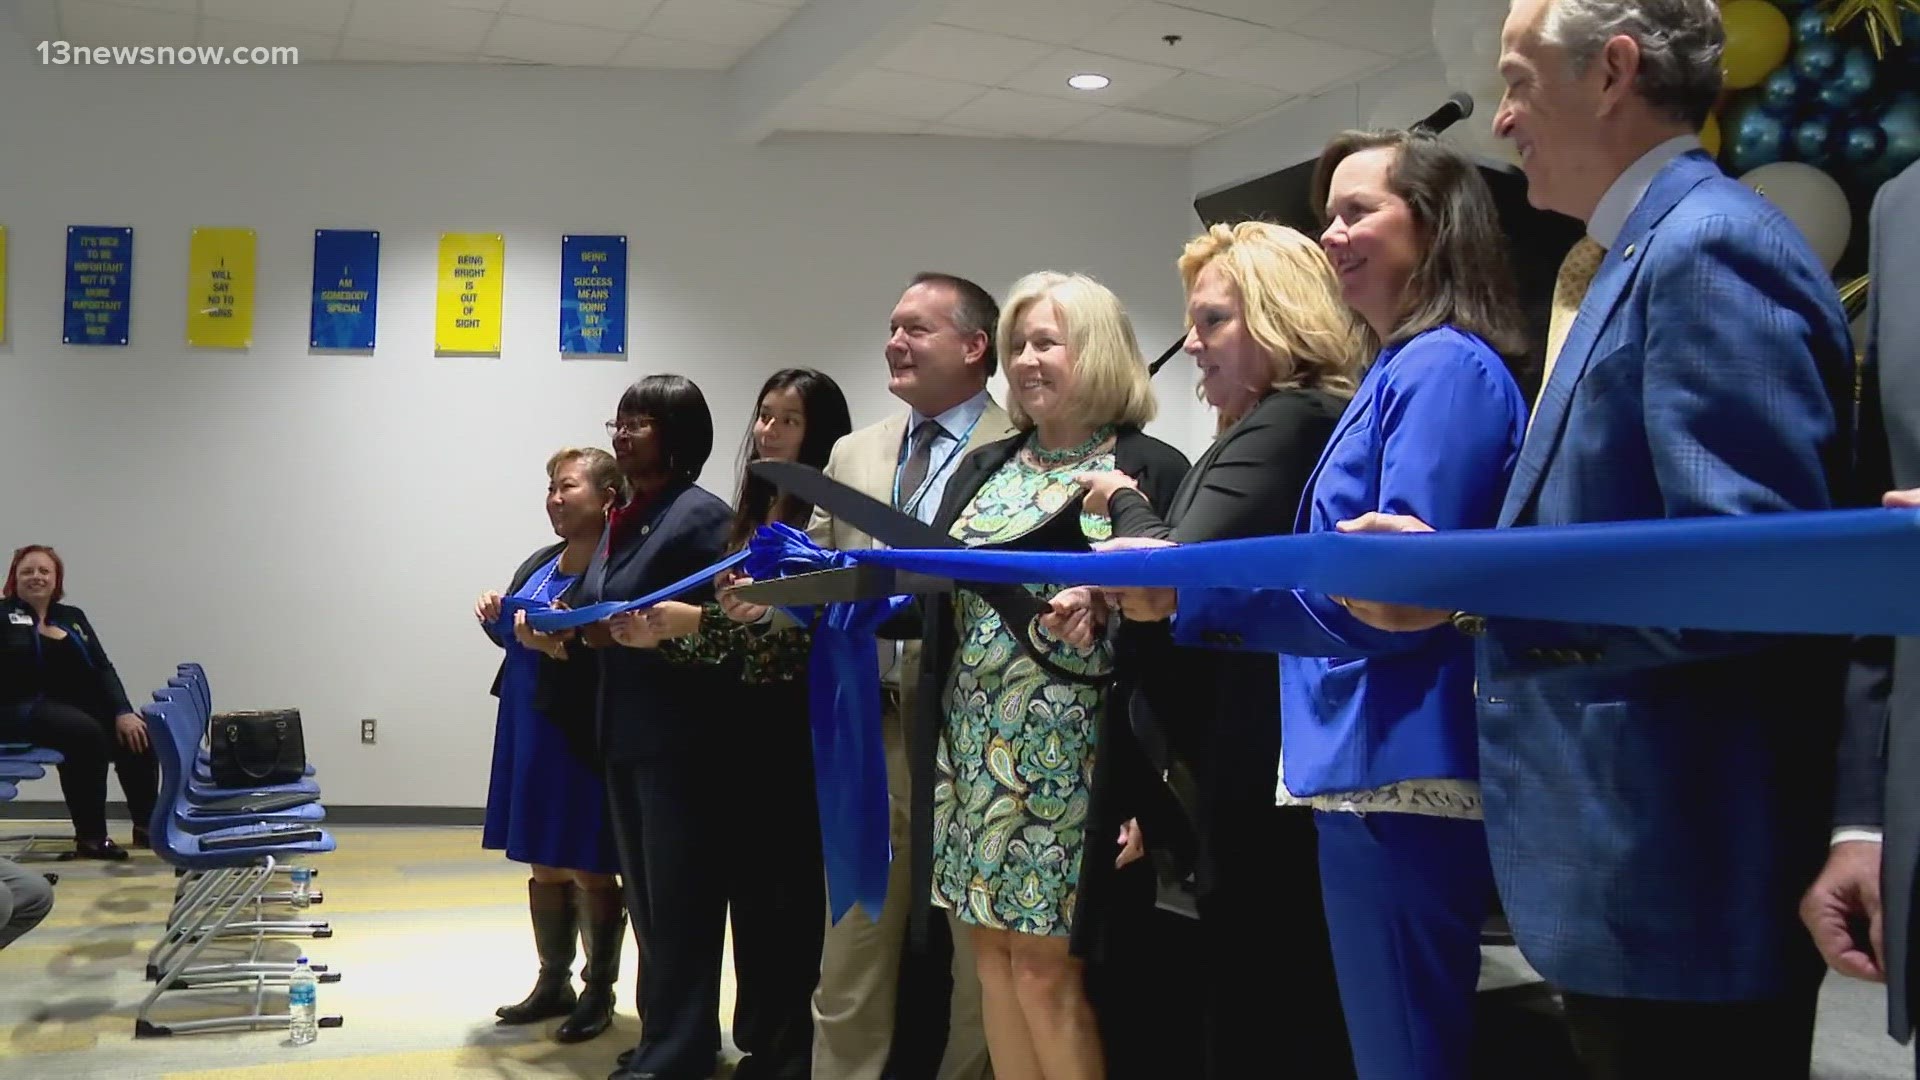 An Achievable Dream Academy held a dedication ceremony Wednesday for a new building for its high school program.